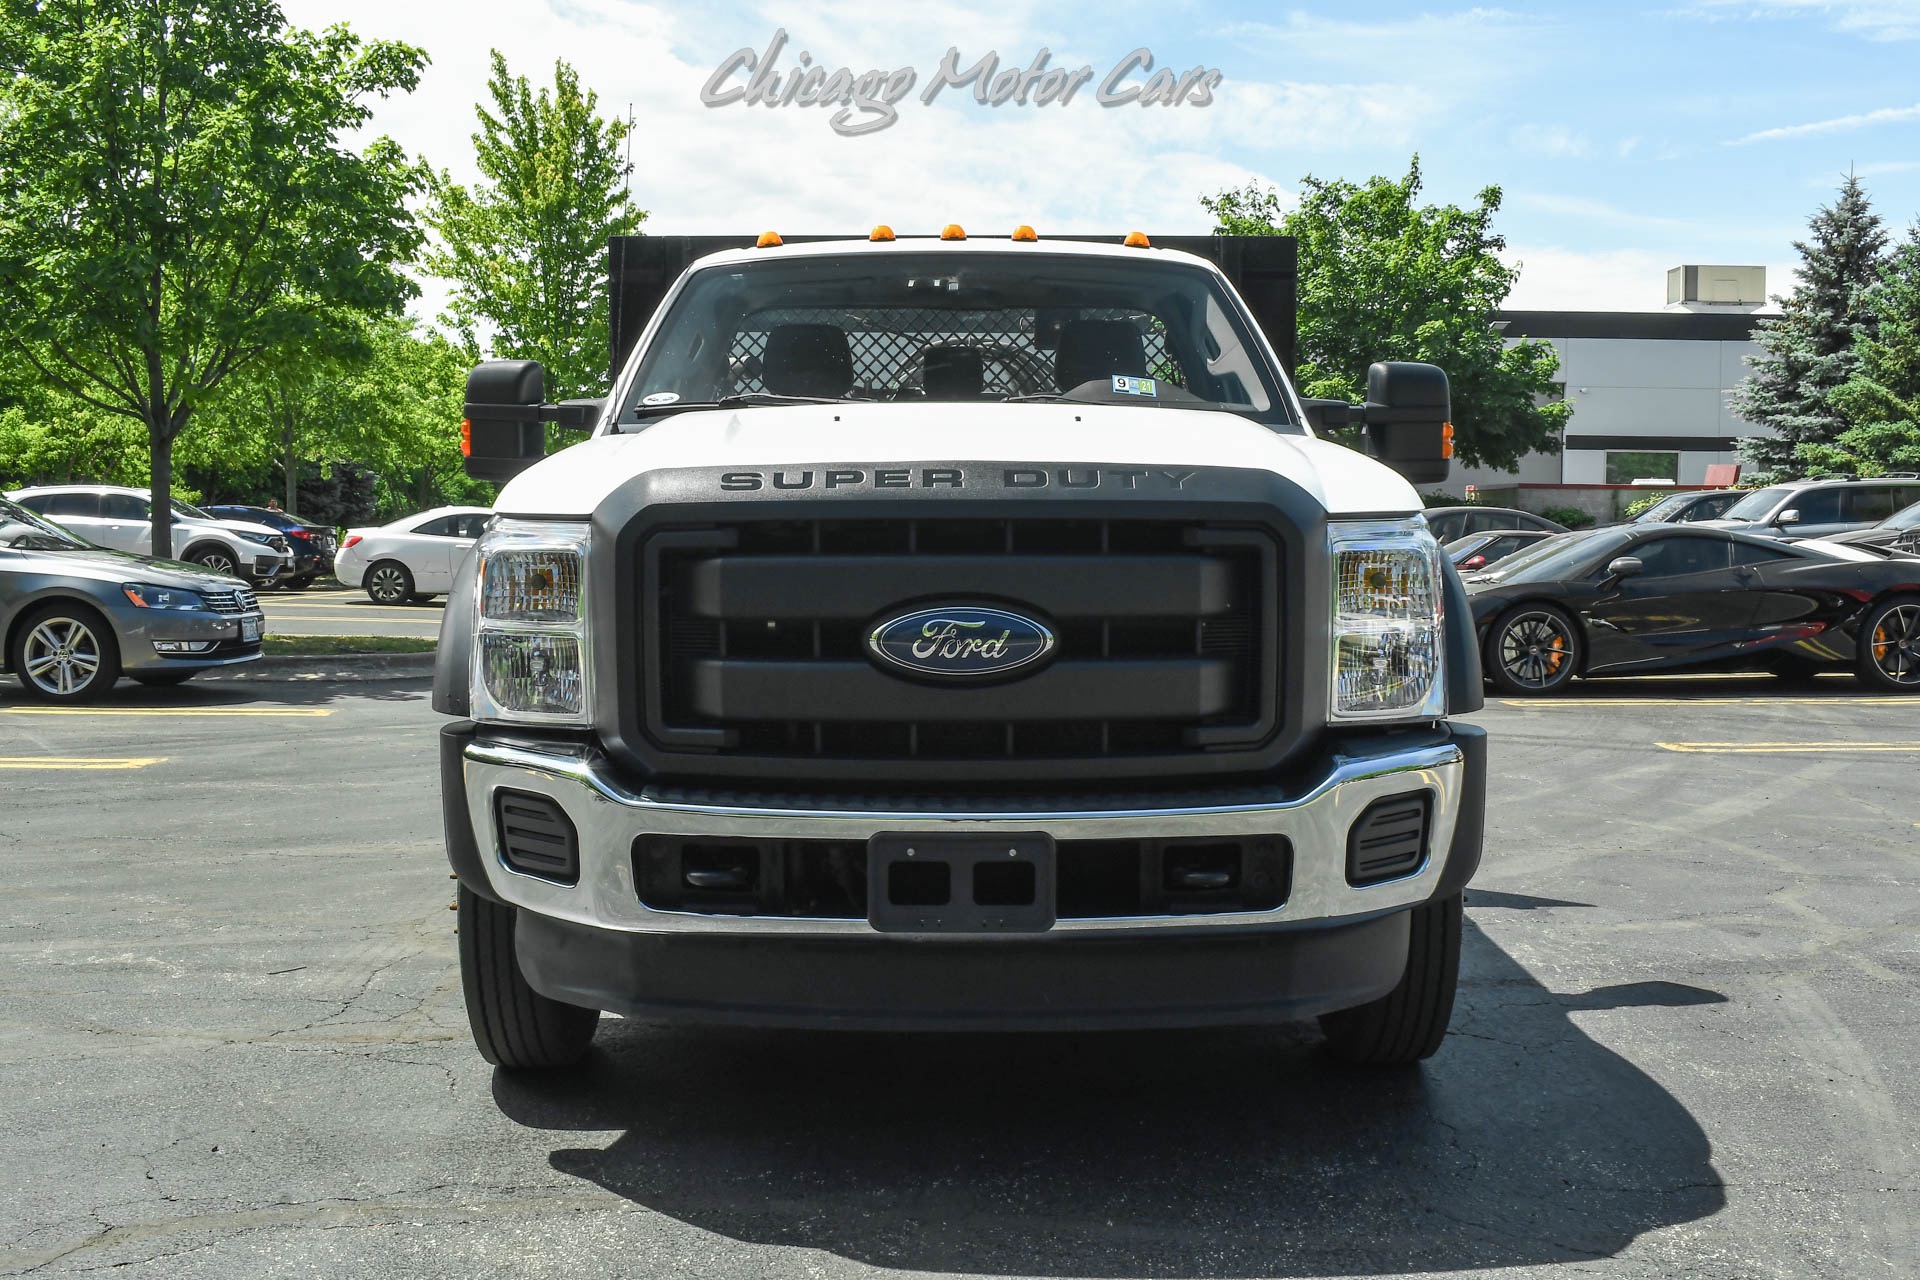 Used-2016-Ford-F550-Super-Duty-Work-Truck-Great-Service-History-Low-Miles